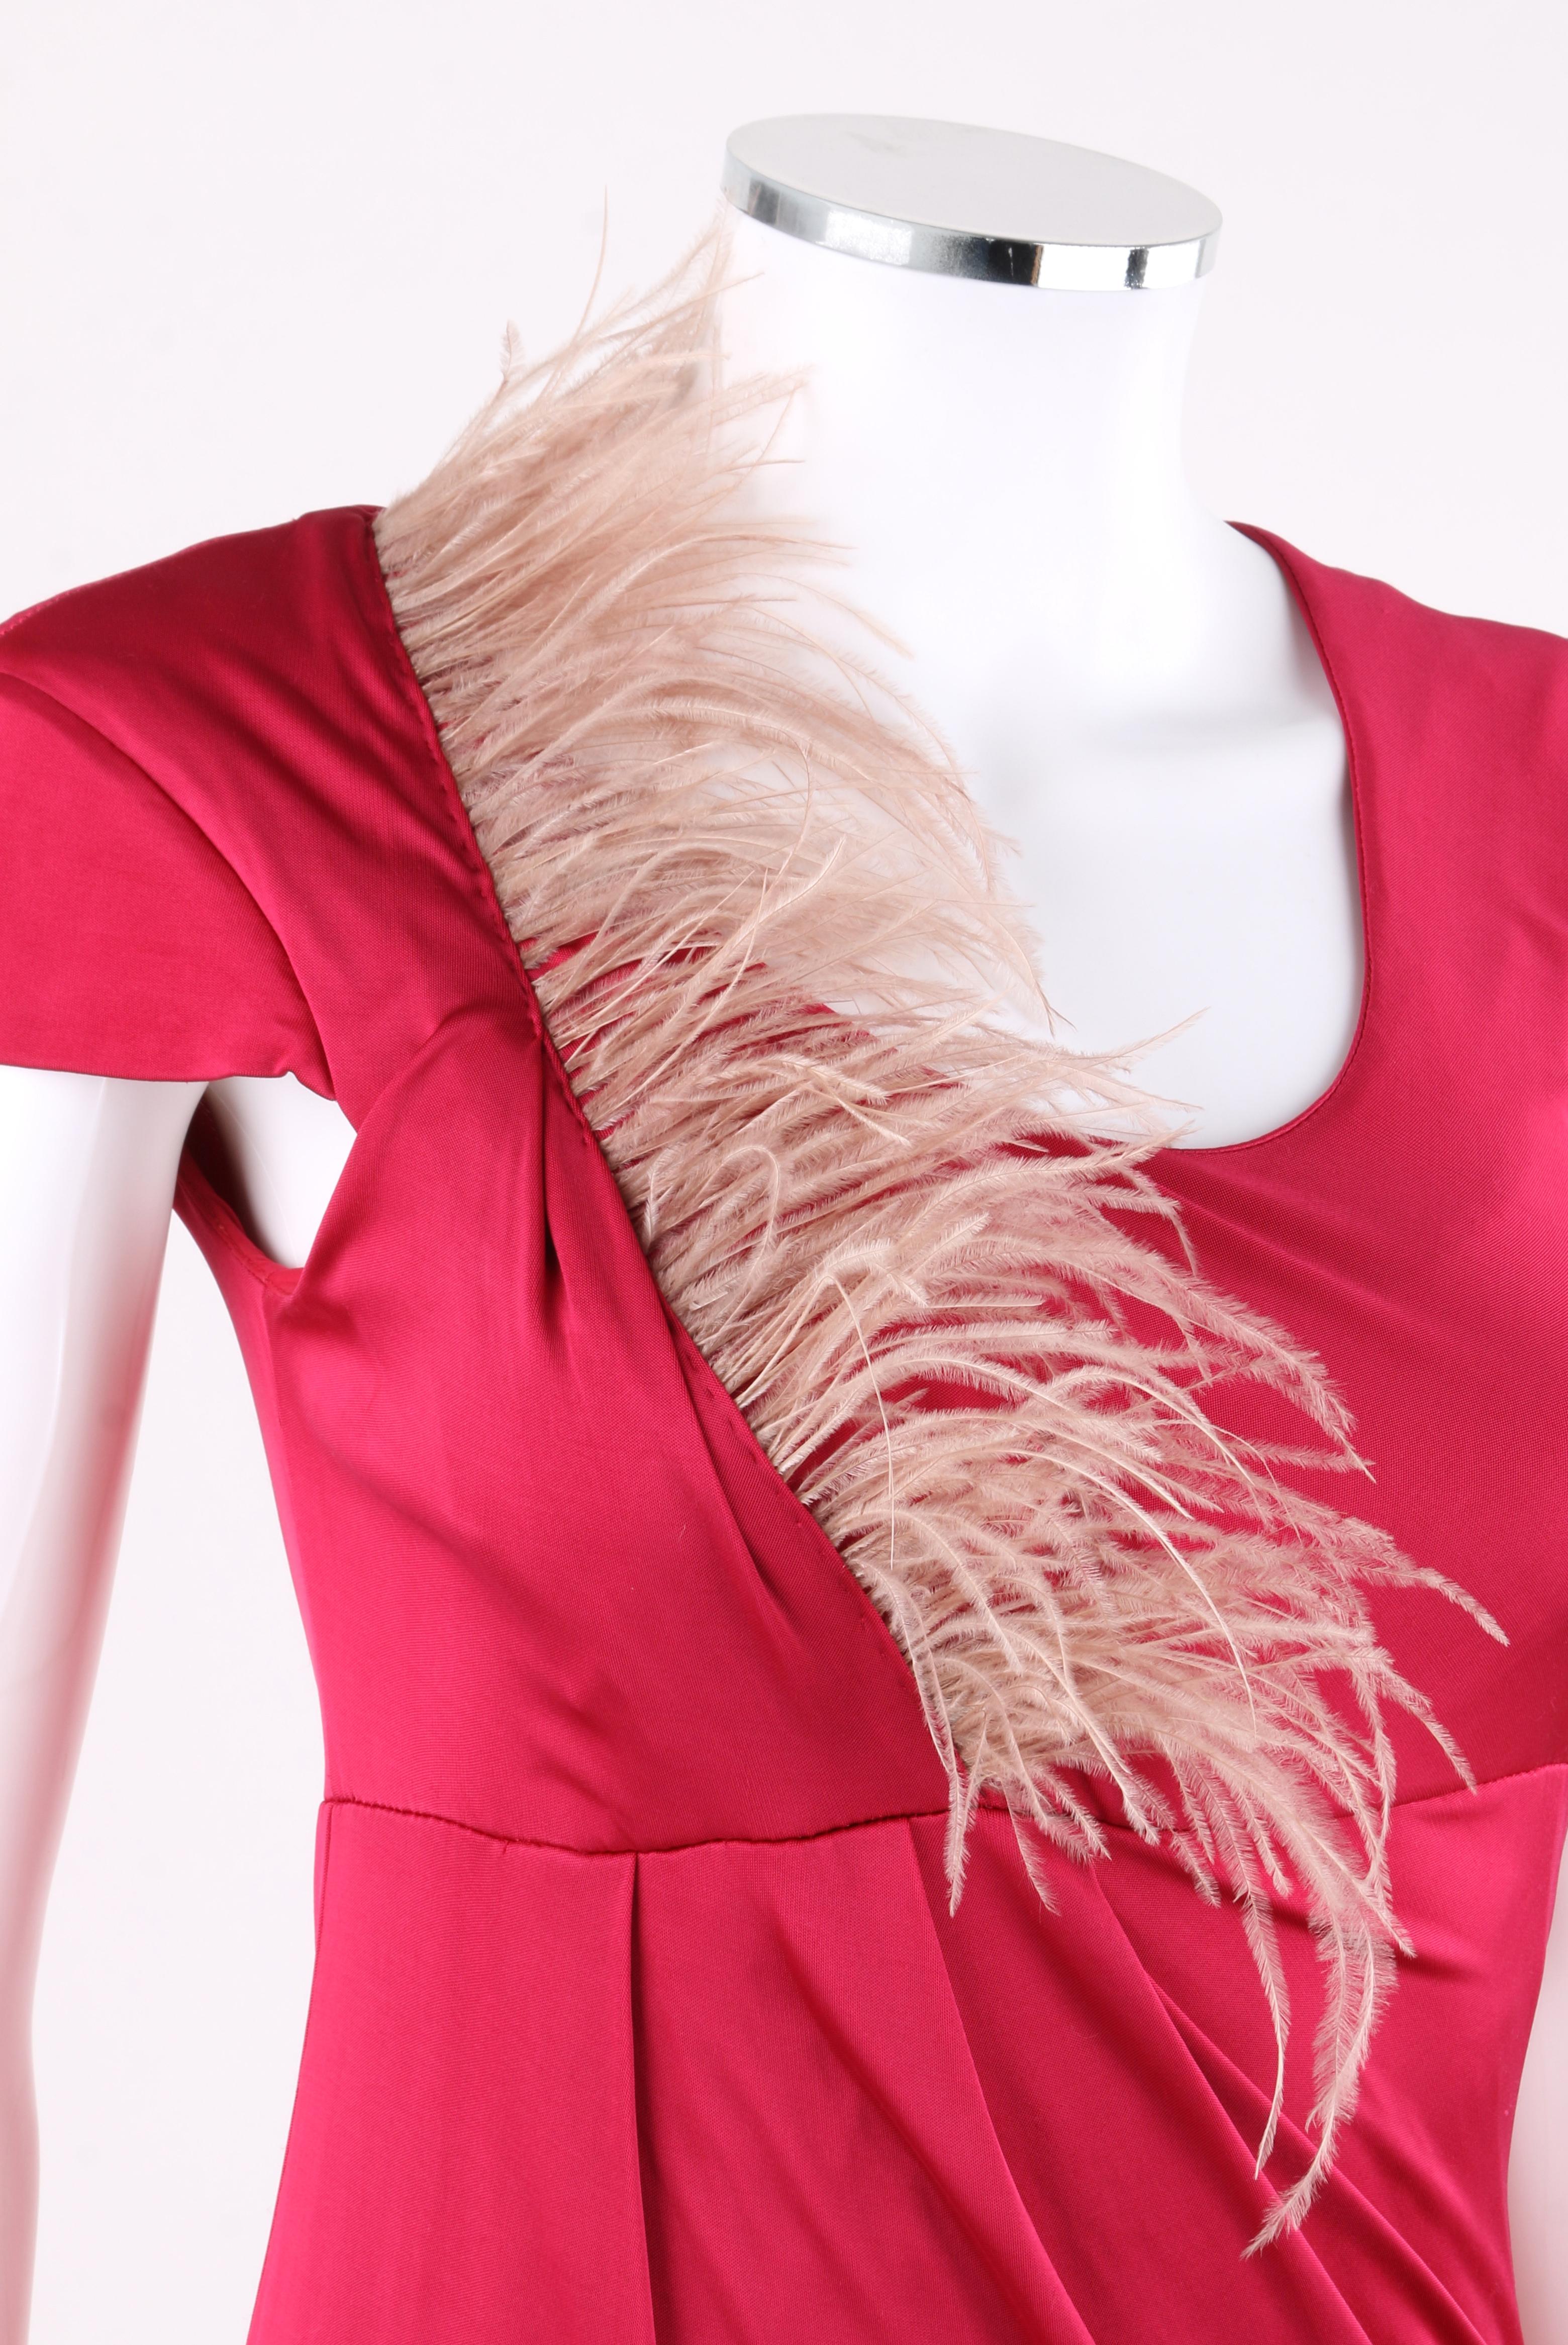 ALEXANDER McQUEEN c.2006 Cerise Silk Jersey Draped Ostrich Feather Top

Brand / Manufacturer: Alexander McQueen
Designer: Alexander McQueen
Style: Jersey Top
Color(s): Shades of Pink
Lined: Yes
Unmarked Fabric Content (feels like): Silk; ostrich